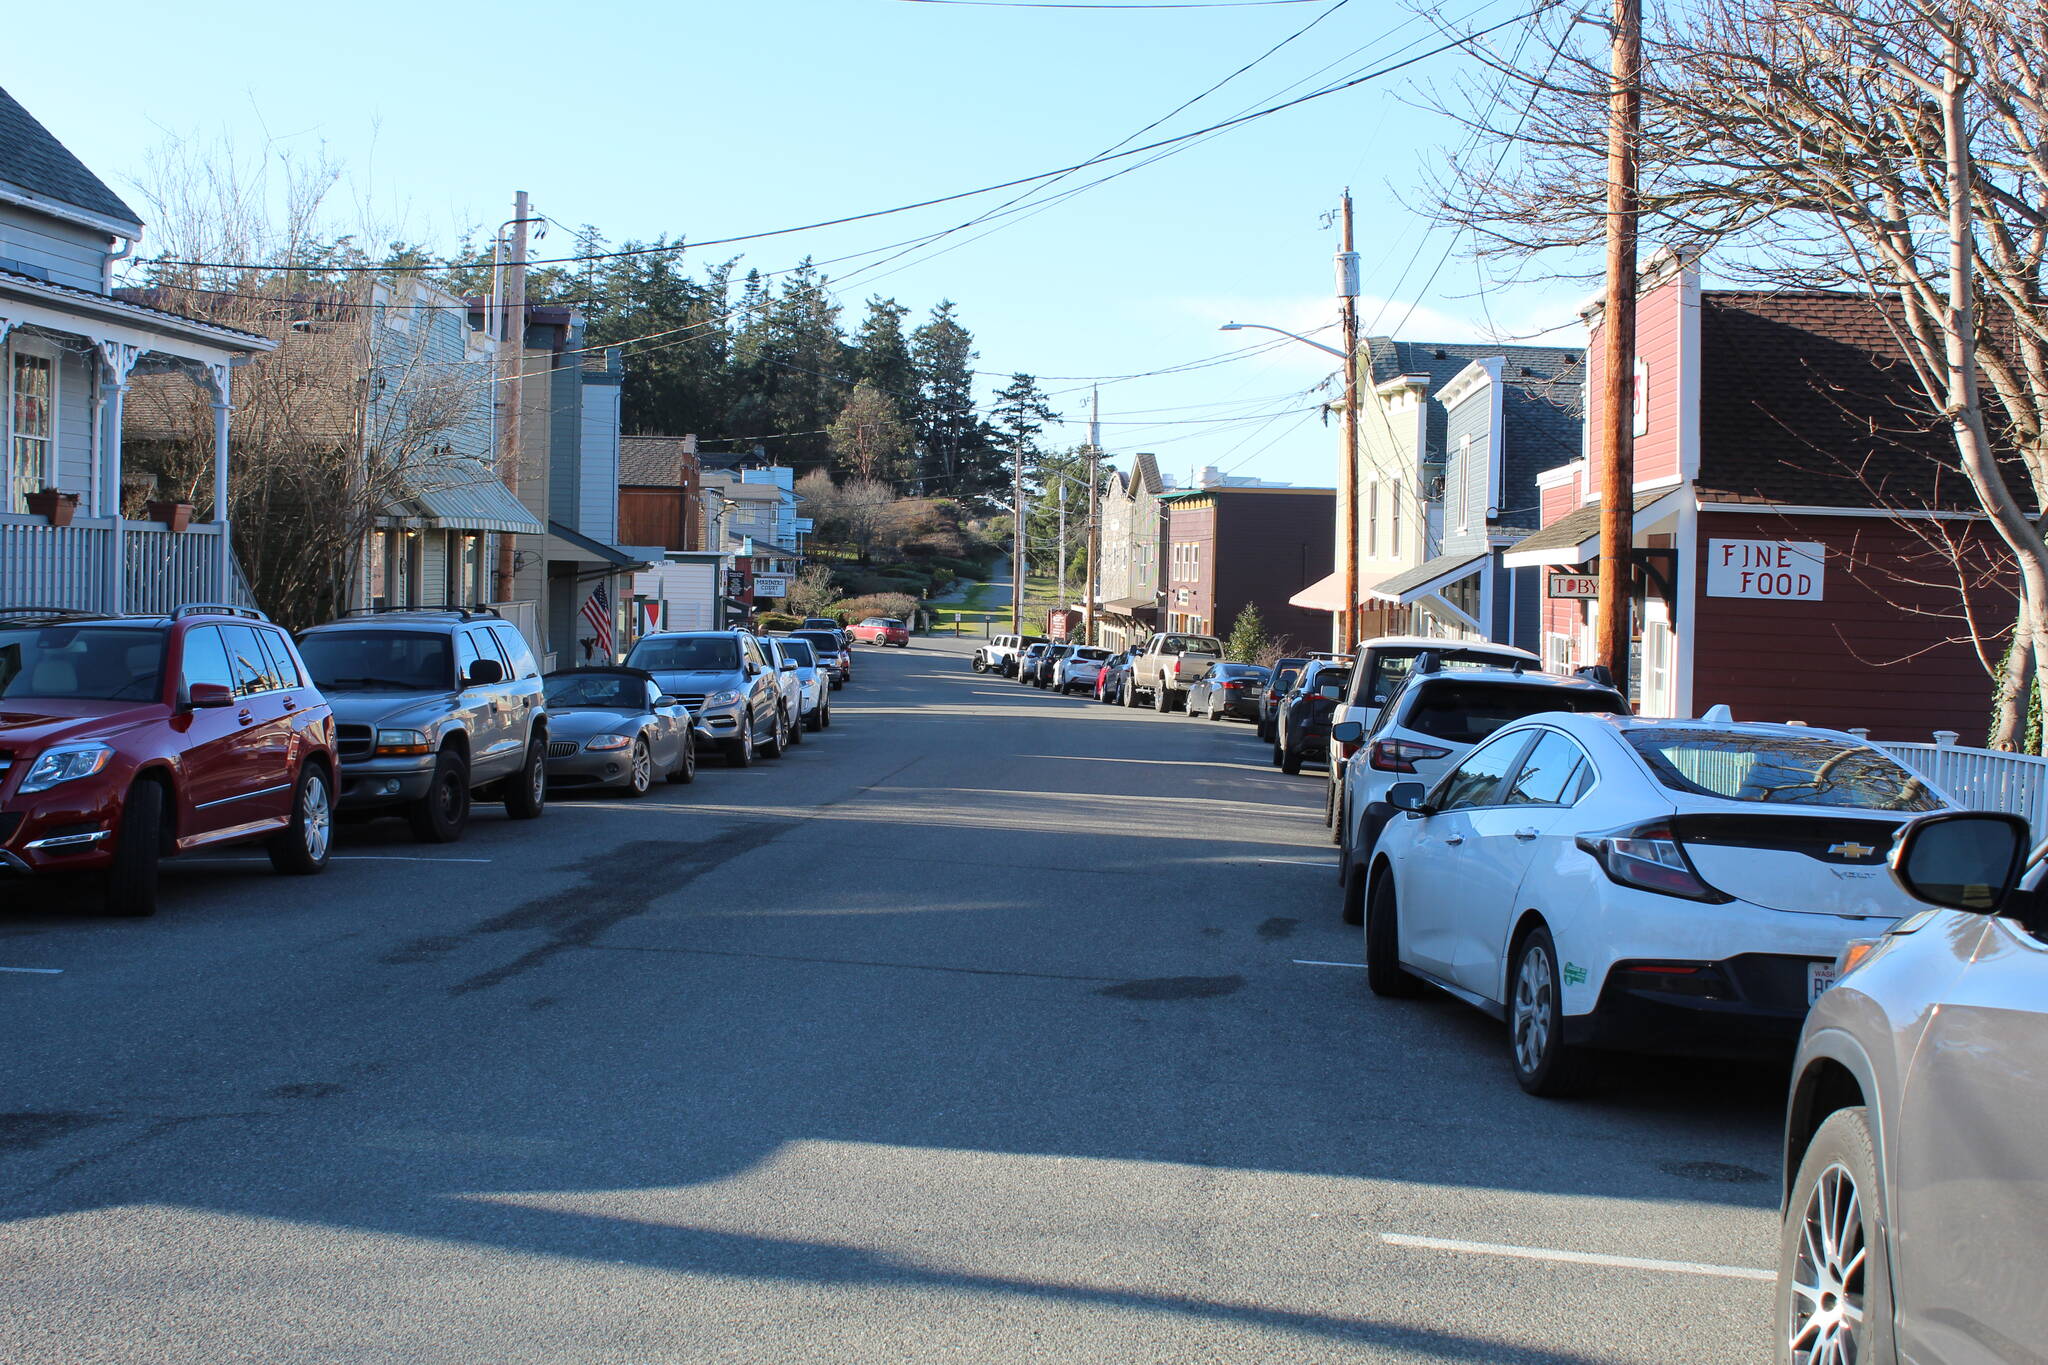 File photo by Karina Andrew/Whidbey News-Times
Coupeville town officials are considering making Front Street one way and adding angled parking to make the historic downtown area more pedestrian-friendly.